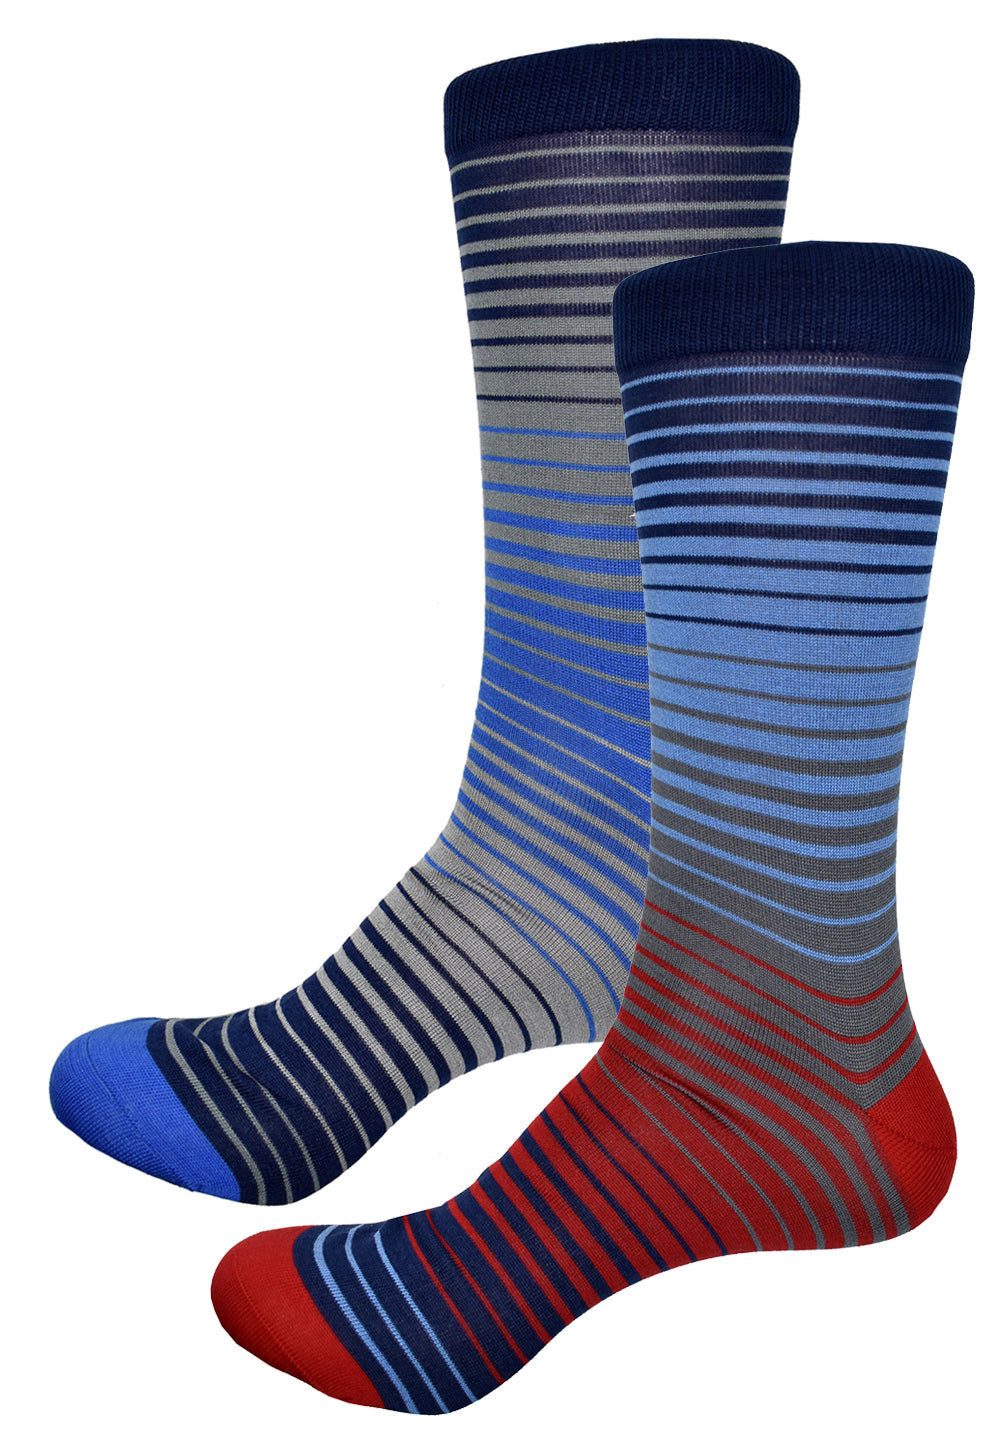 Classic pattern sock with a variated stripe pattern, a truly unique fashion. Cotton with nylon blend for comfort.  Fine Multi Stripe - Red or Blue  Truly unique fashion in mixed rich colors. Soft mercerized cotton with nylon blend for comfort. One size, fits 10-13.